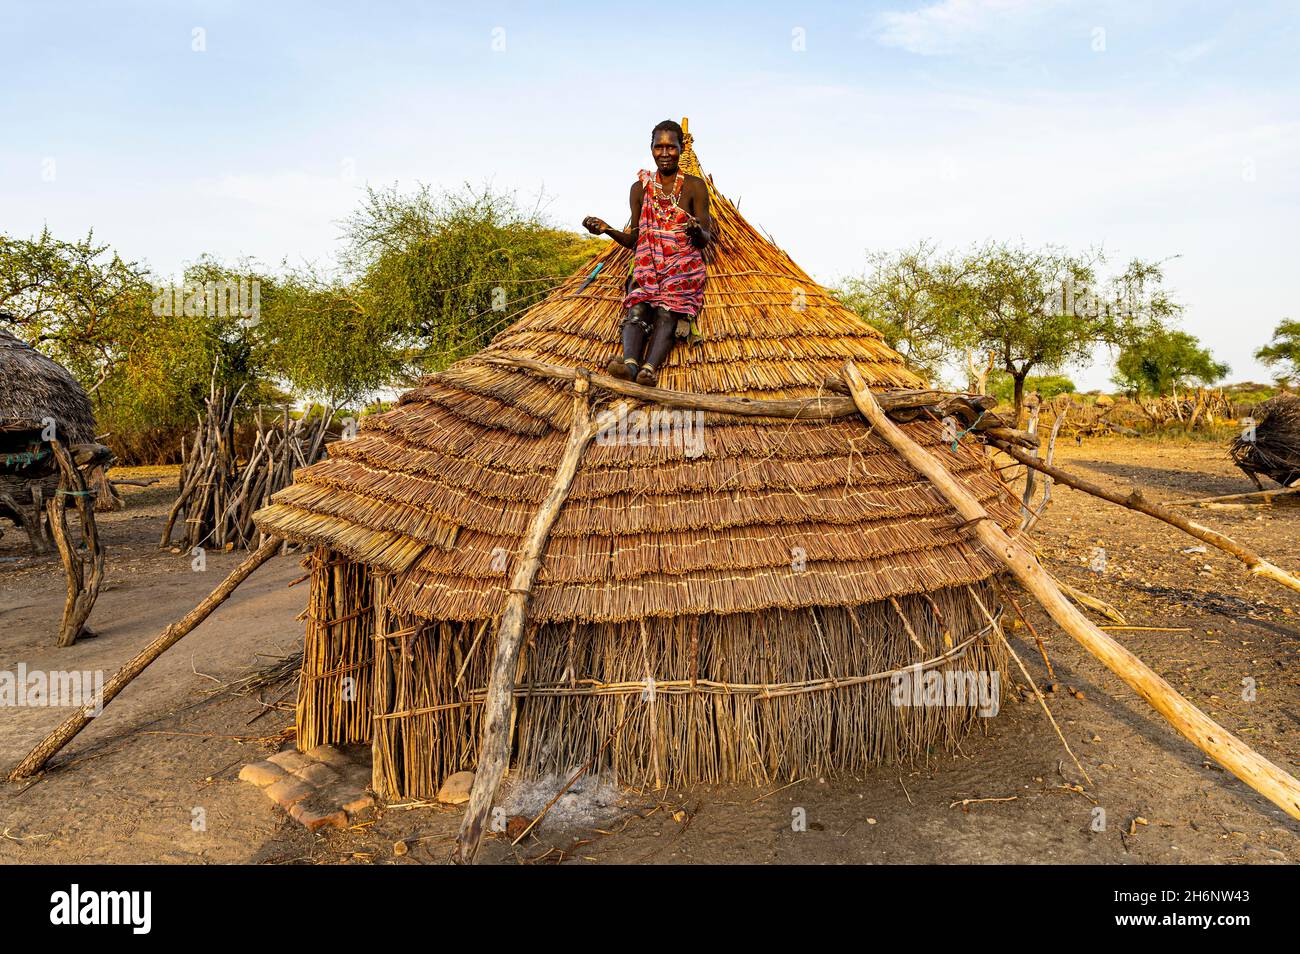 Woman repairing a roof of a traditional build hut of the Toposa tribe, Eastern Equatoria, South Sudan Stock Photo